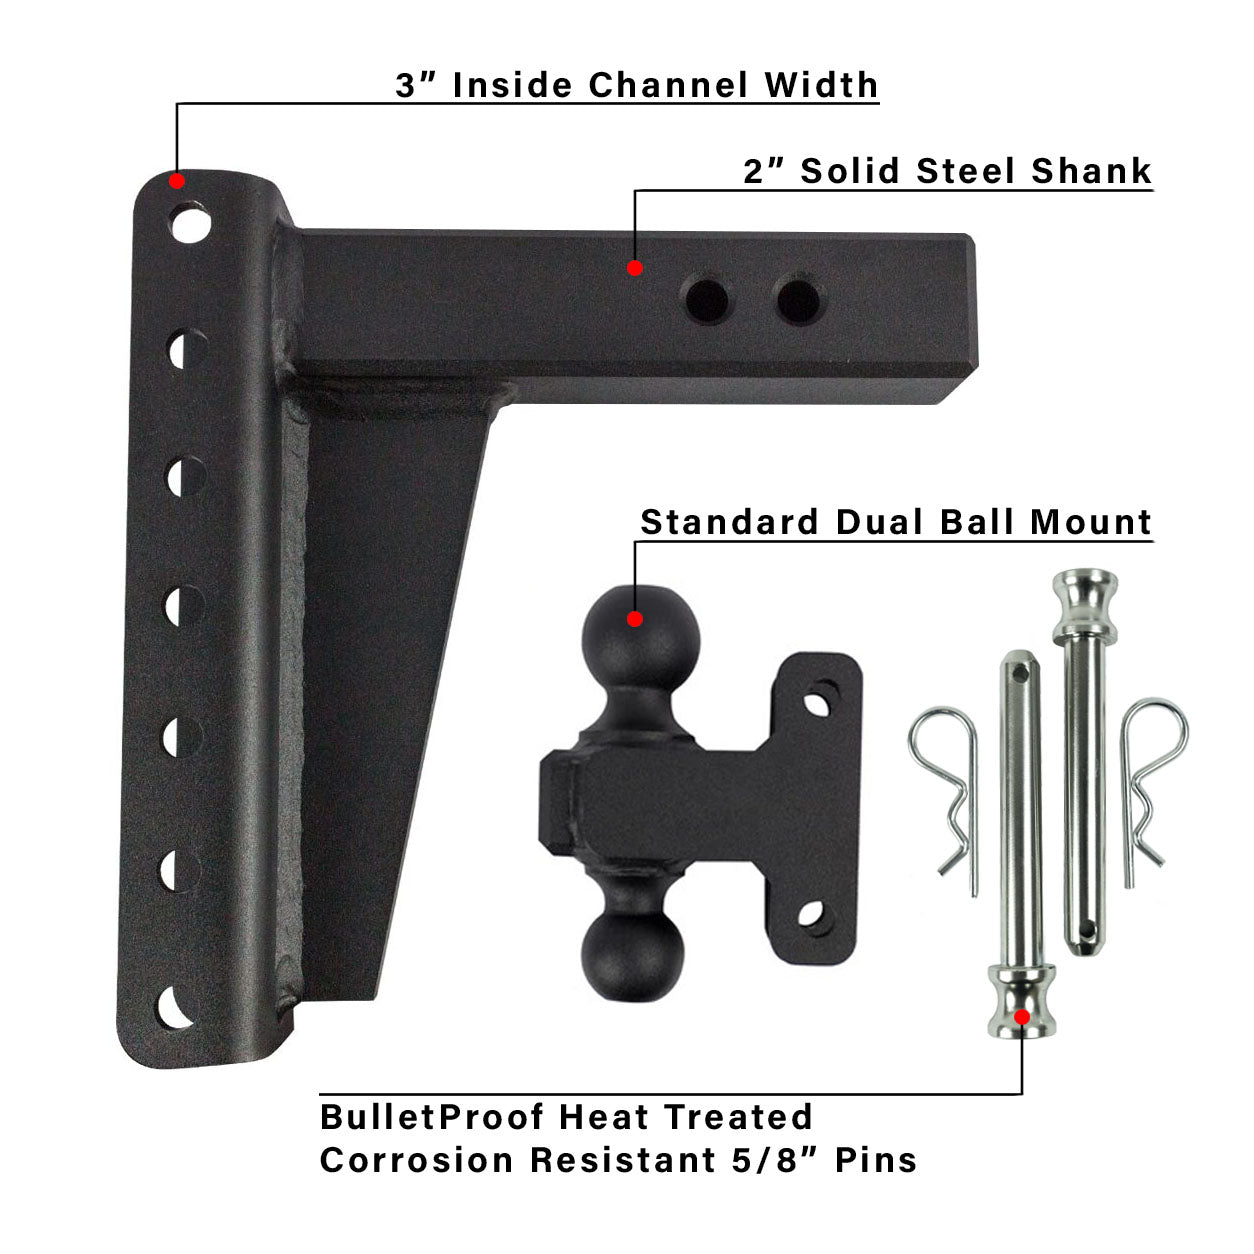 2.0" Heavy Duty 8" Drop/Rise Hitch Included Parts